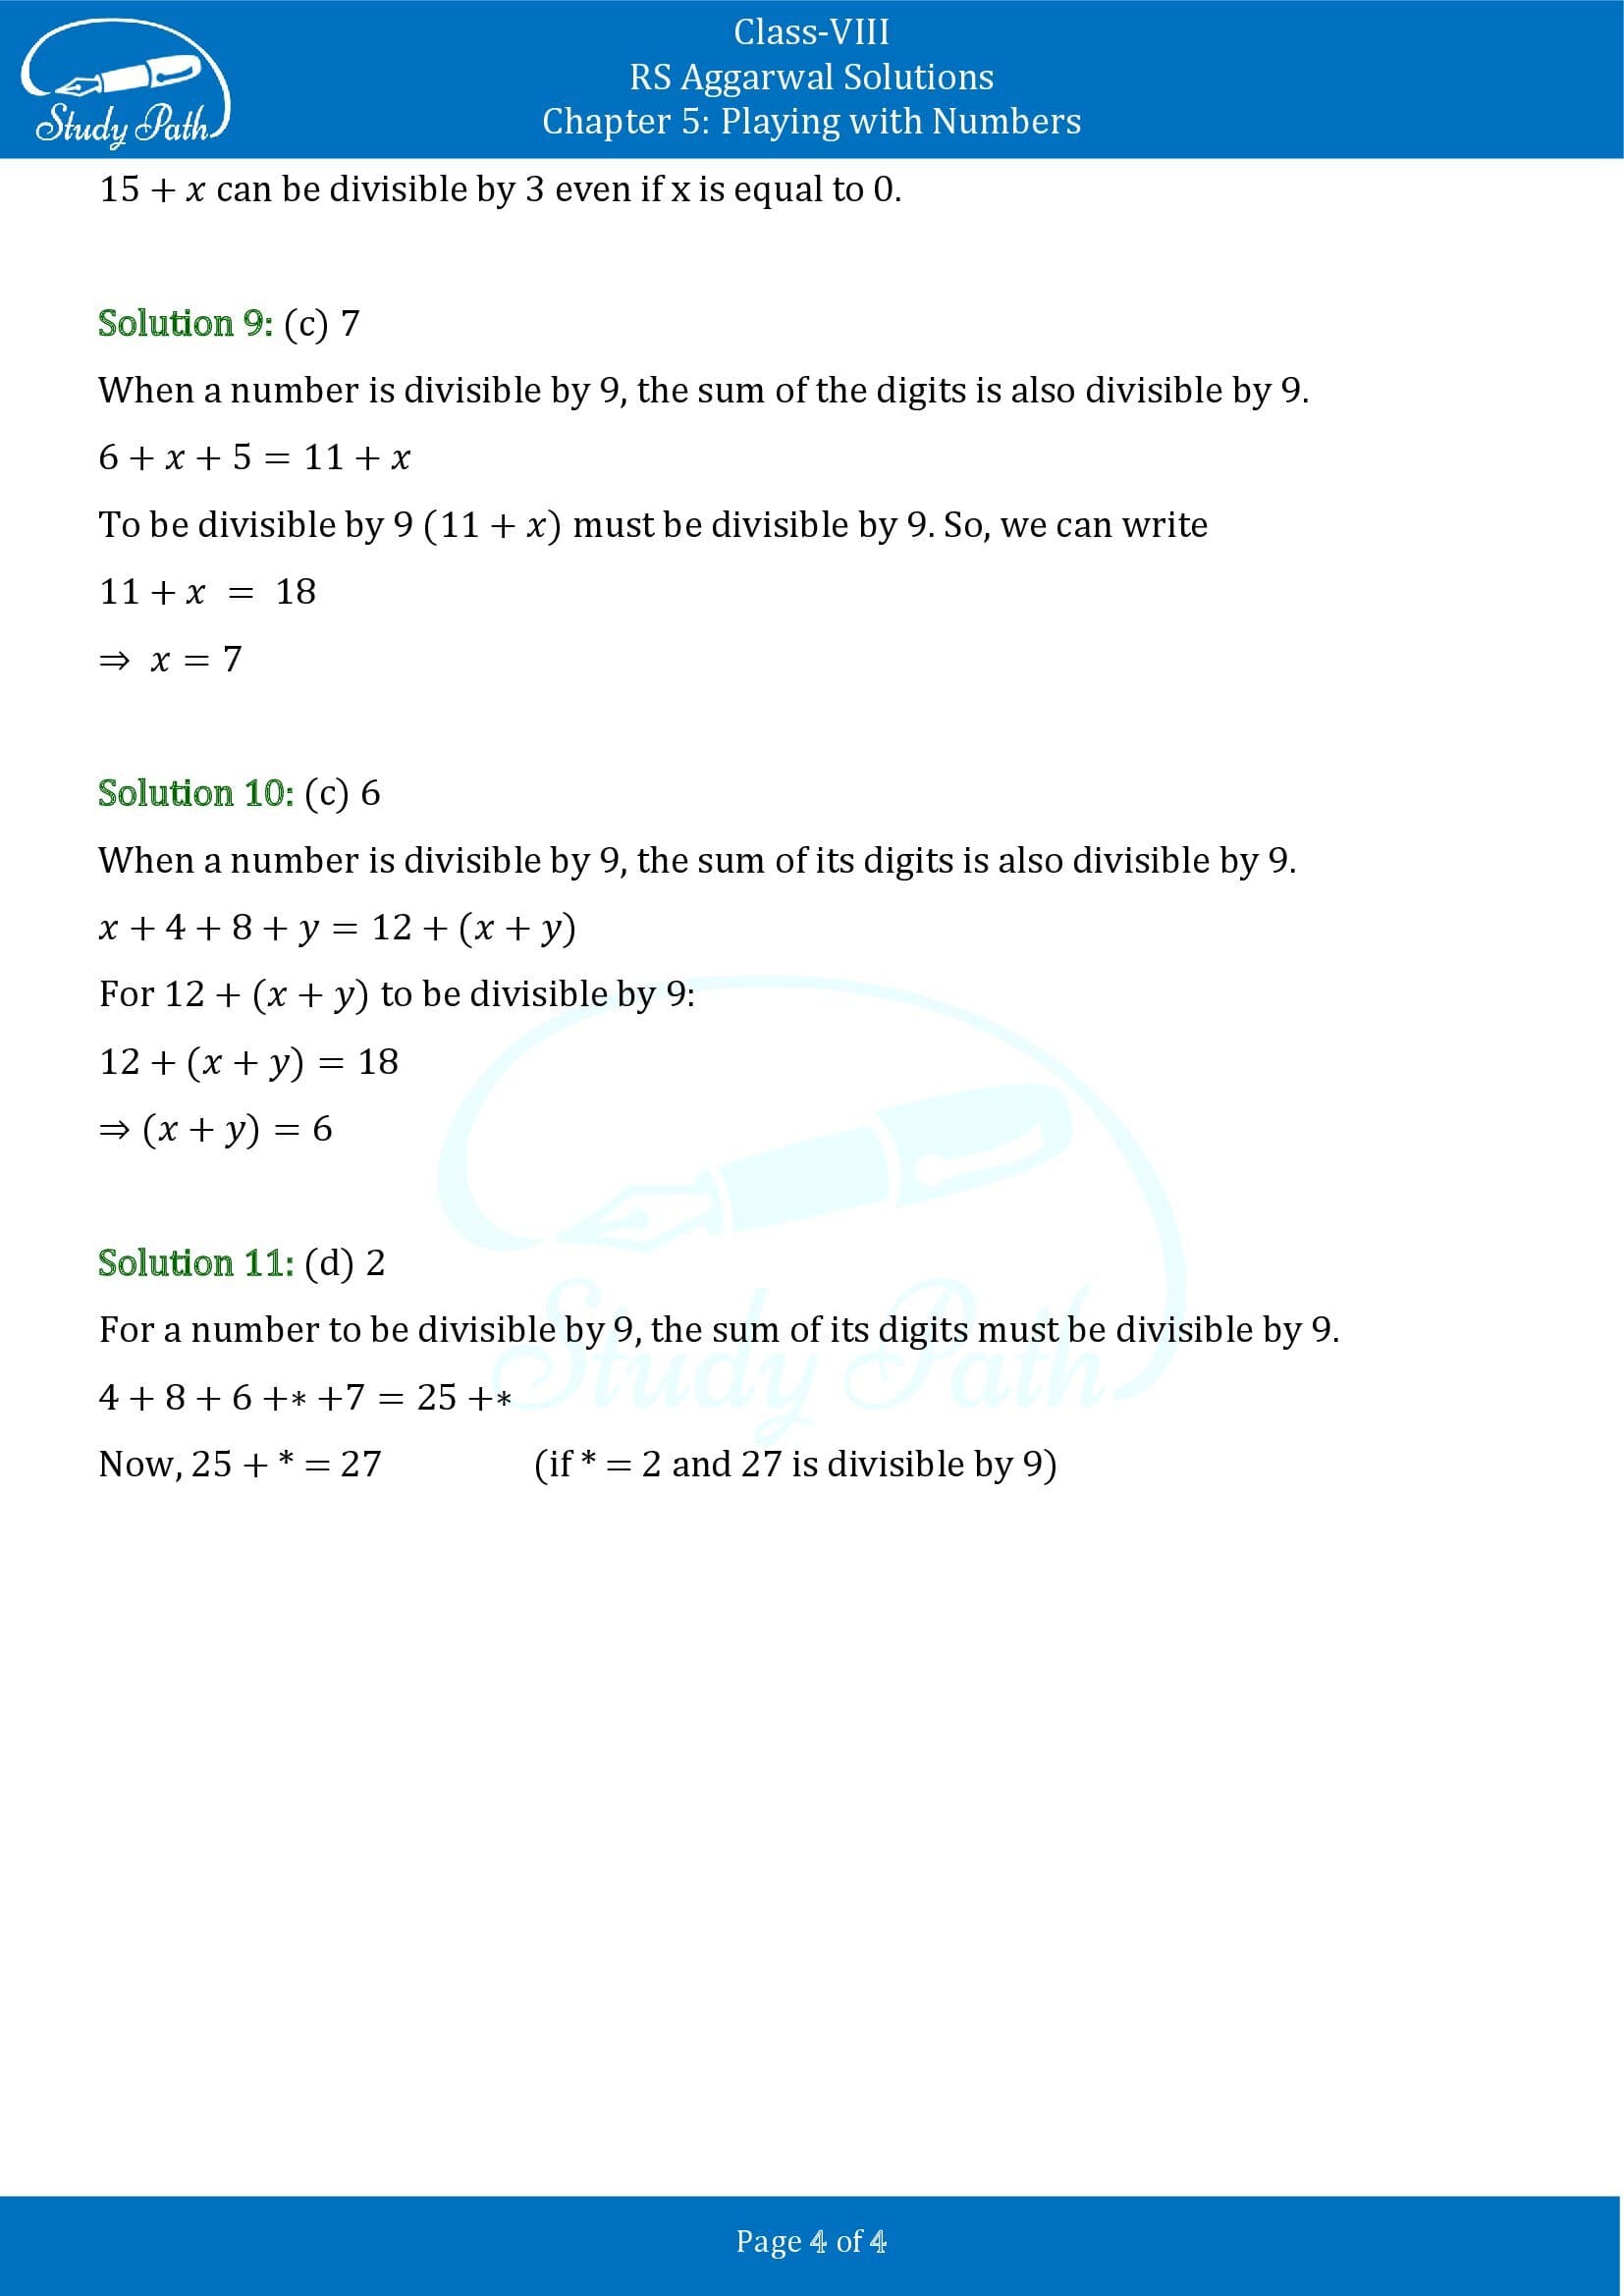 RS Aggarwal Solutions Class 8 Chapter 5 Playing with Numbers Test Paper 00004